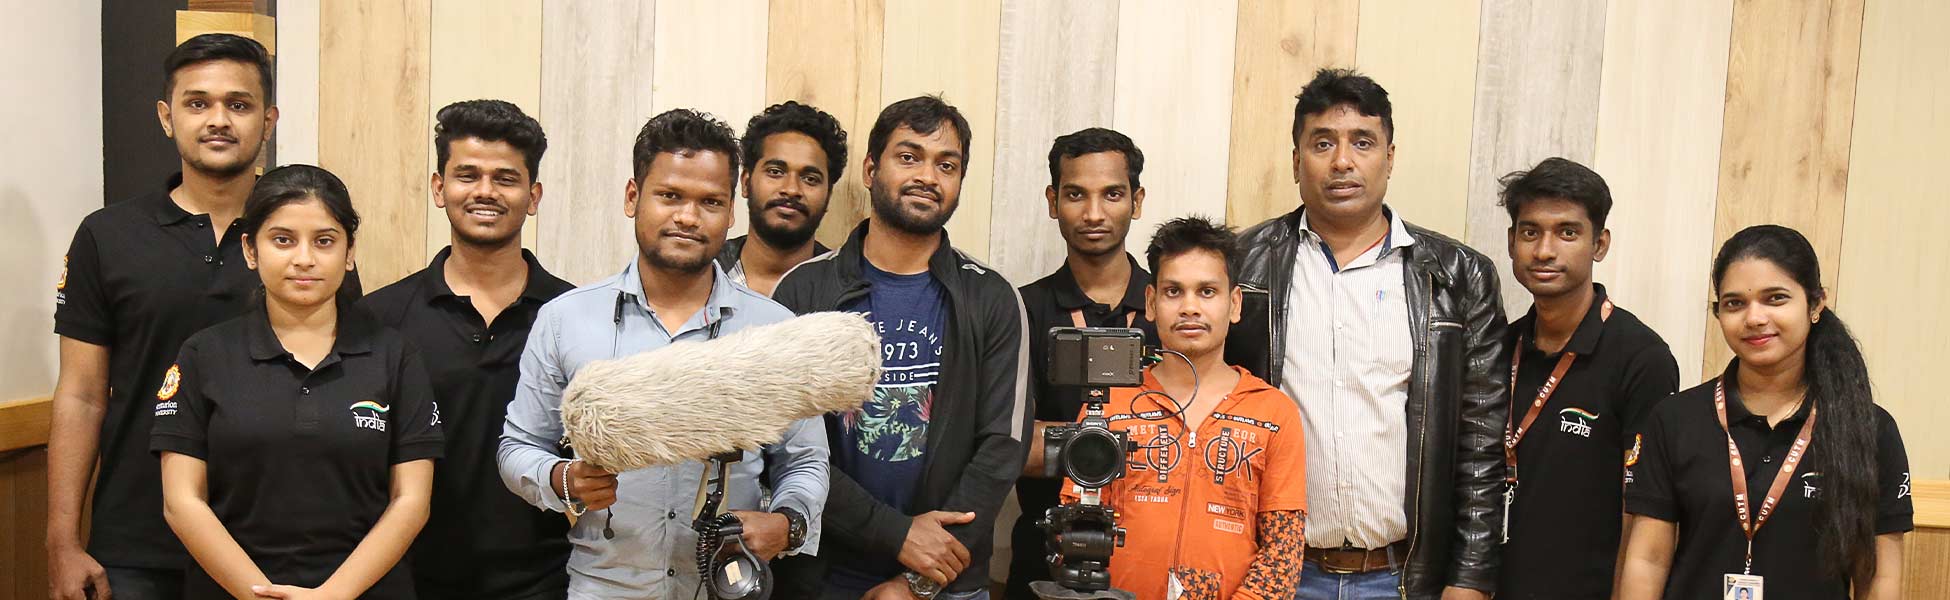 film production house in Qatar, video production house in Qatar, tv production house in Qatar, production house in Qatar, film production company in Qatar, video production company in Qatar, tv production company in Qatar, production company in Qatar